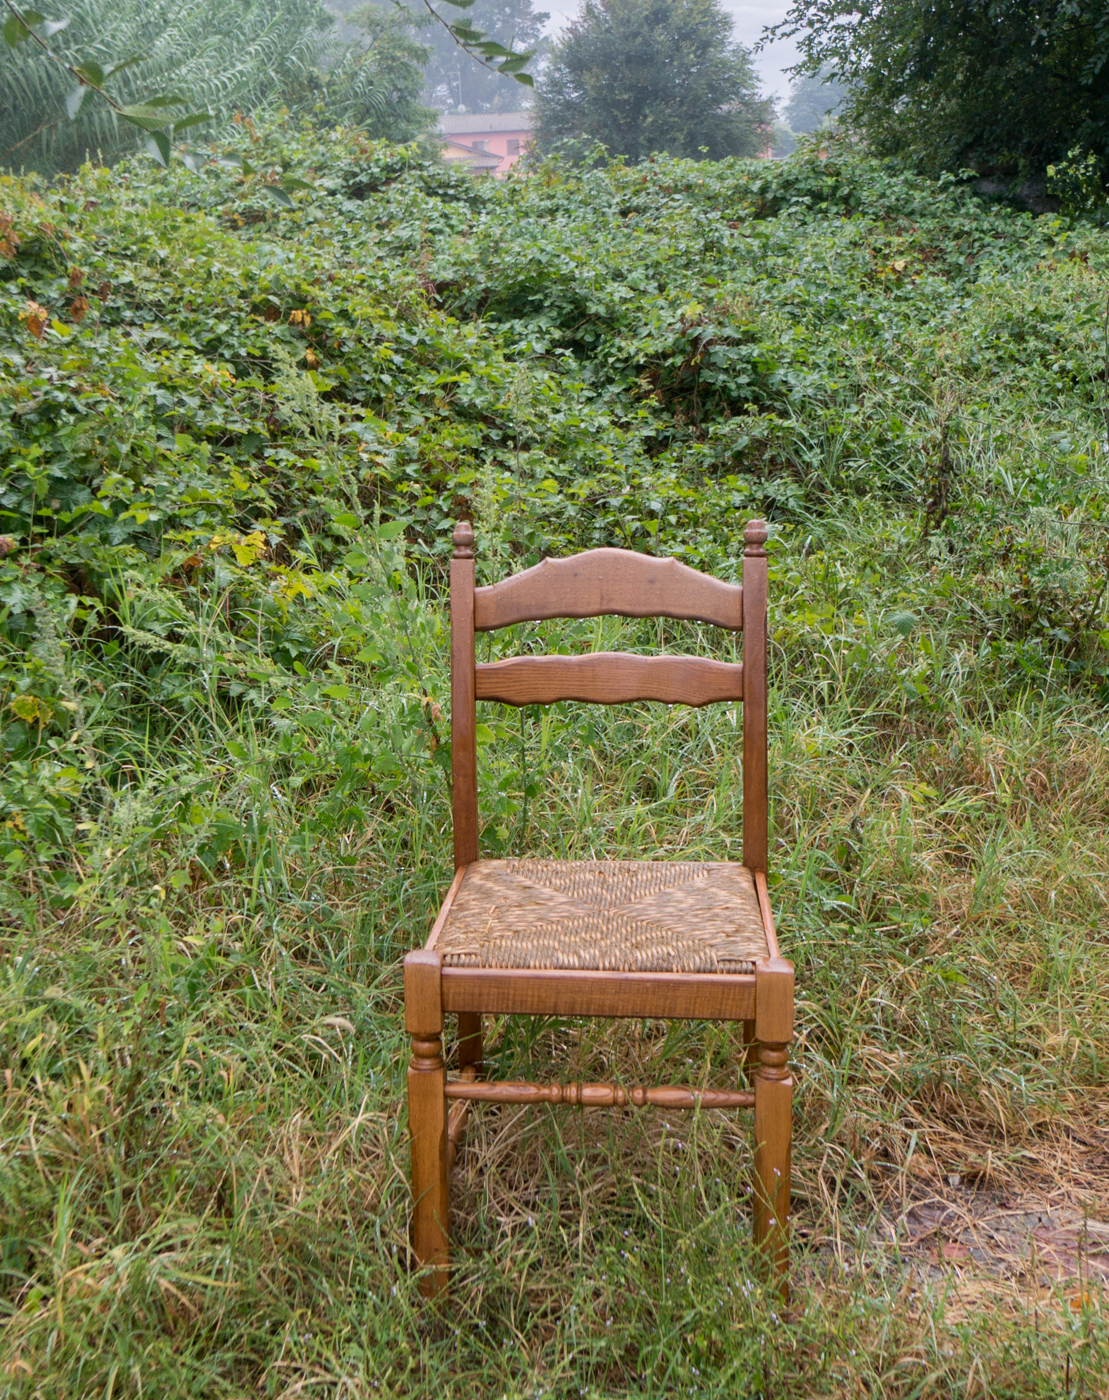 A chair for weary pilgrims placed along the Via Francigena southeast of Mortara, Italy | Photo by Mike Hudak